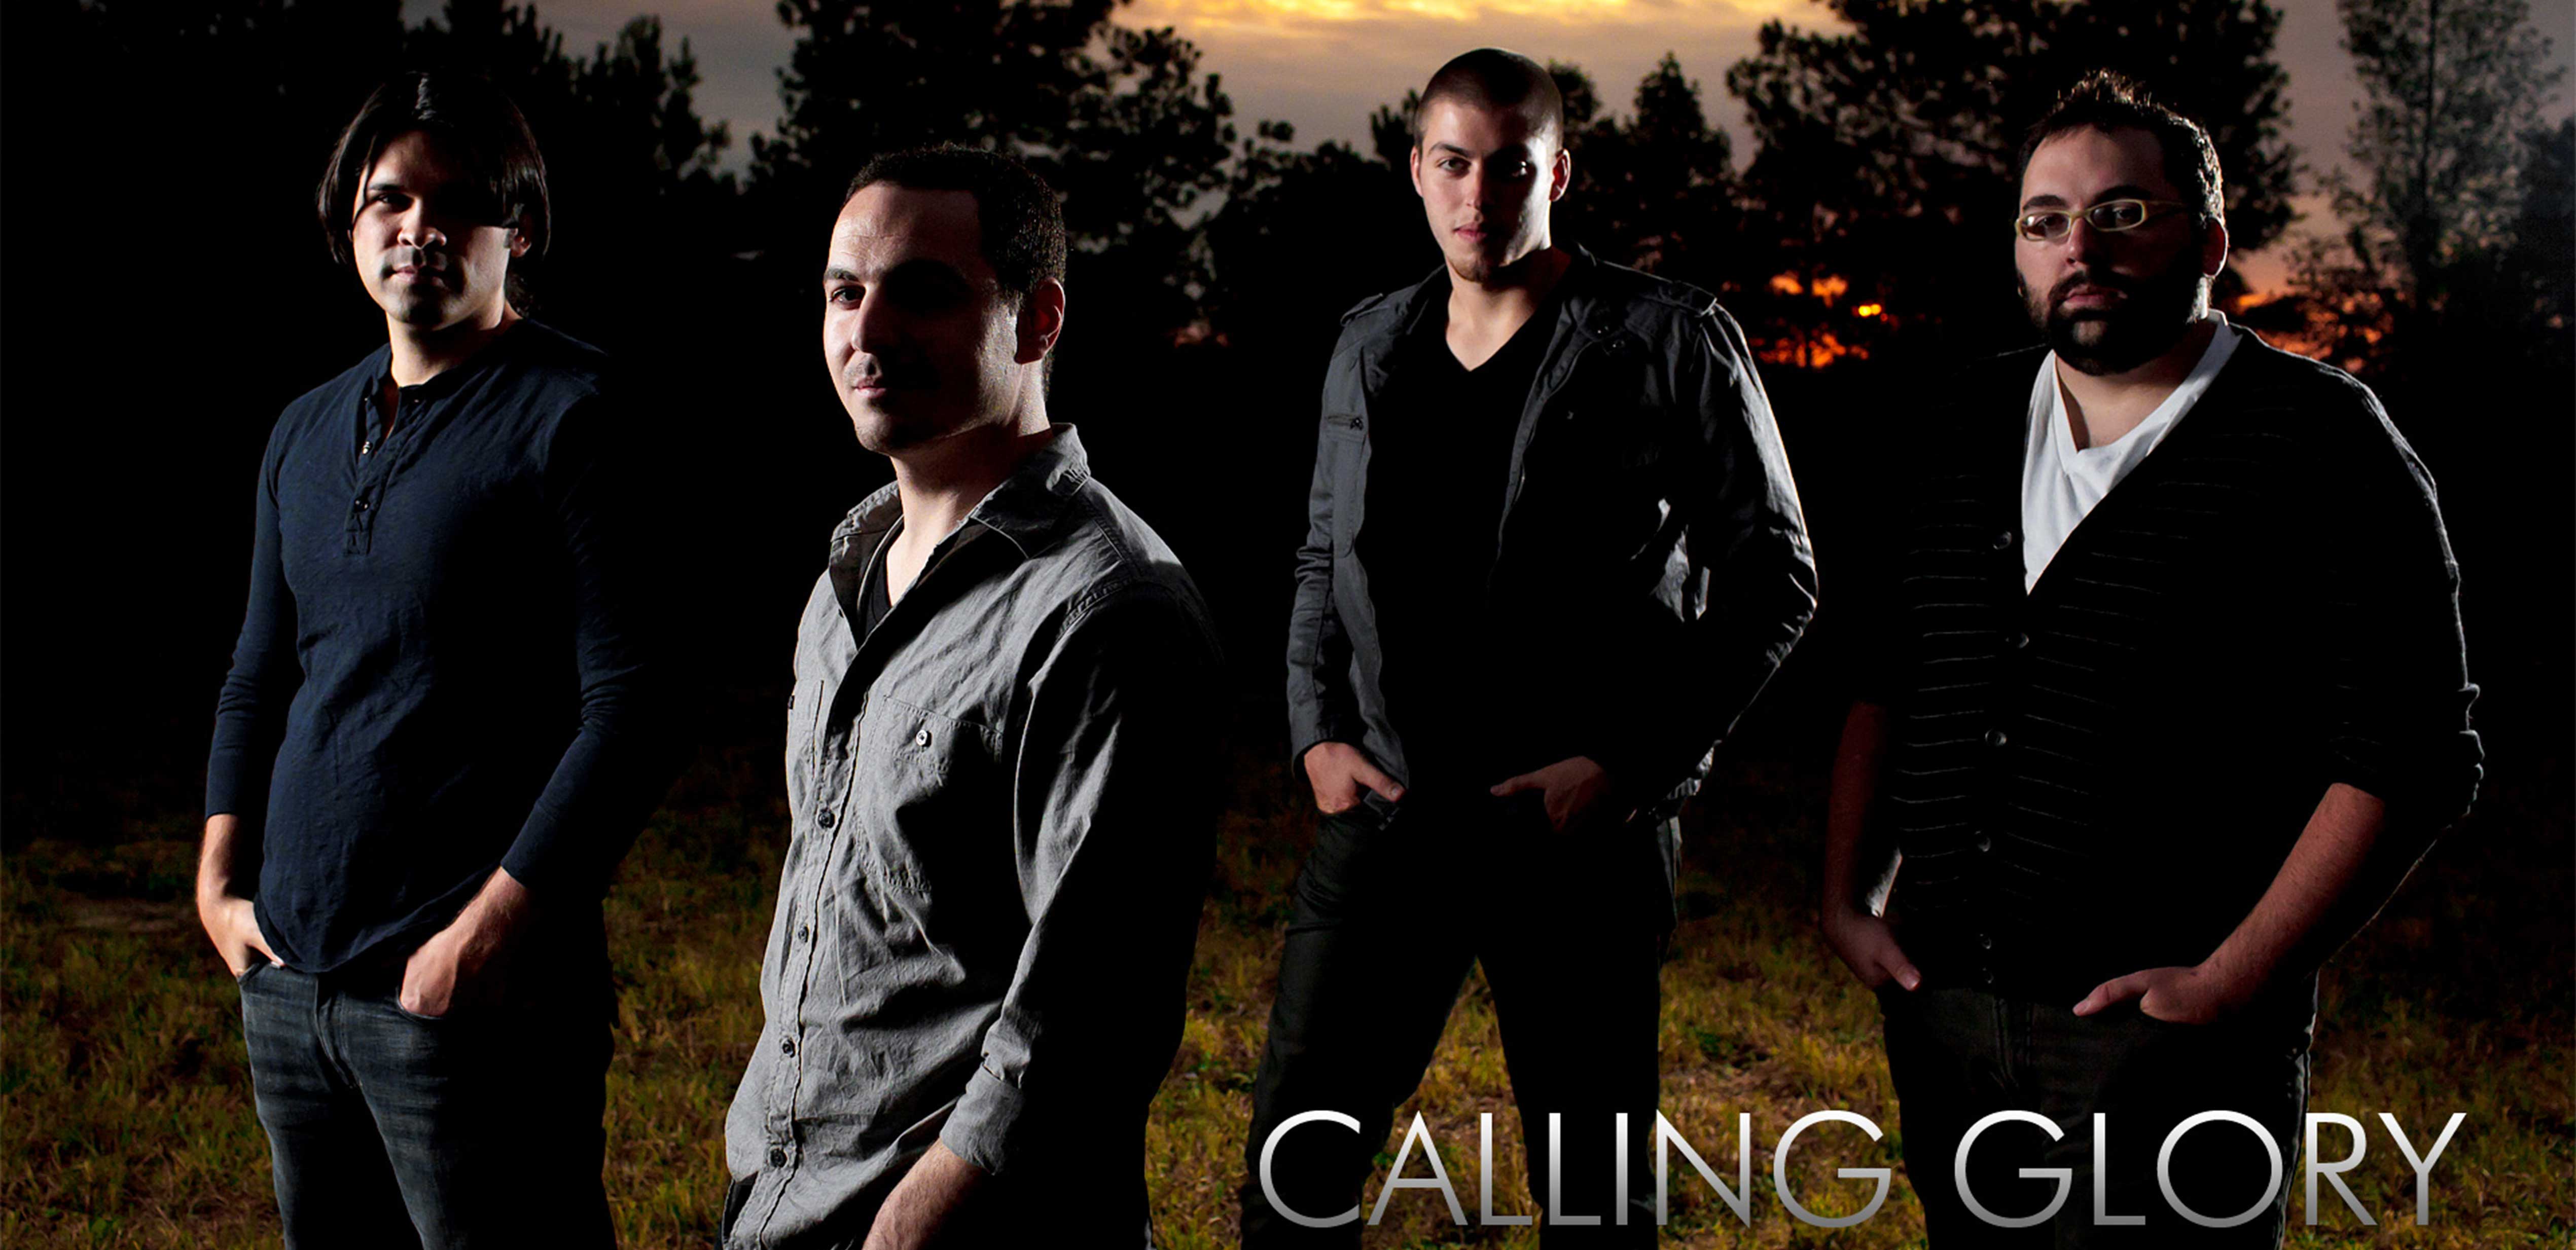  - Christian-Band-Tennessee-Calling-Glory1